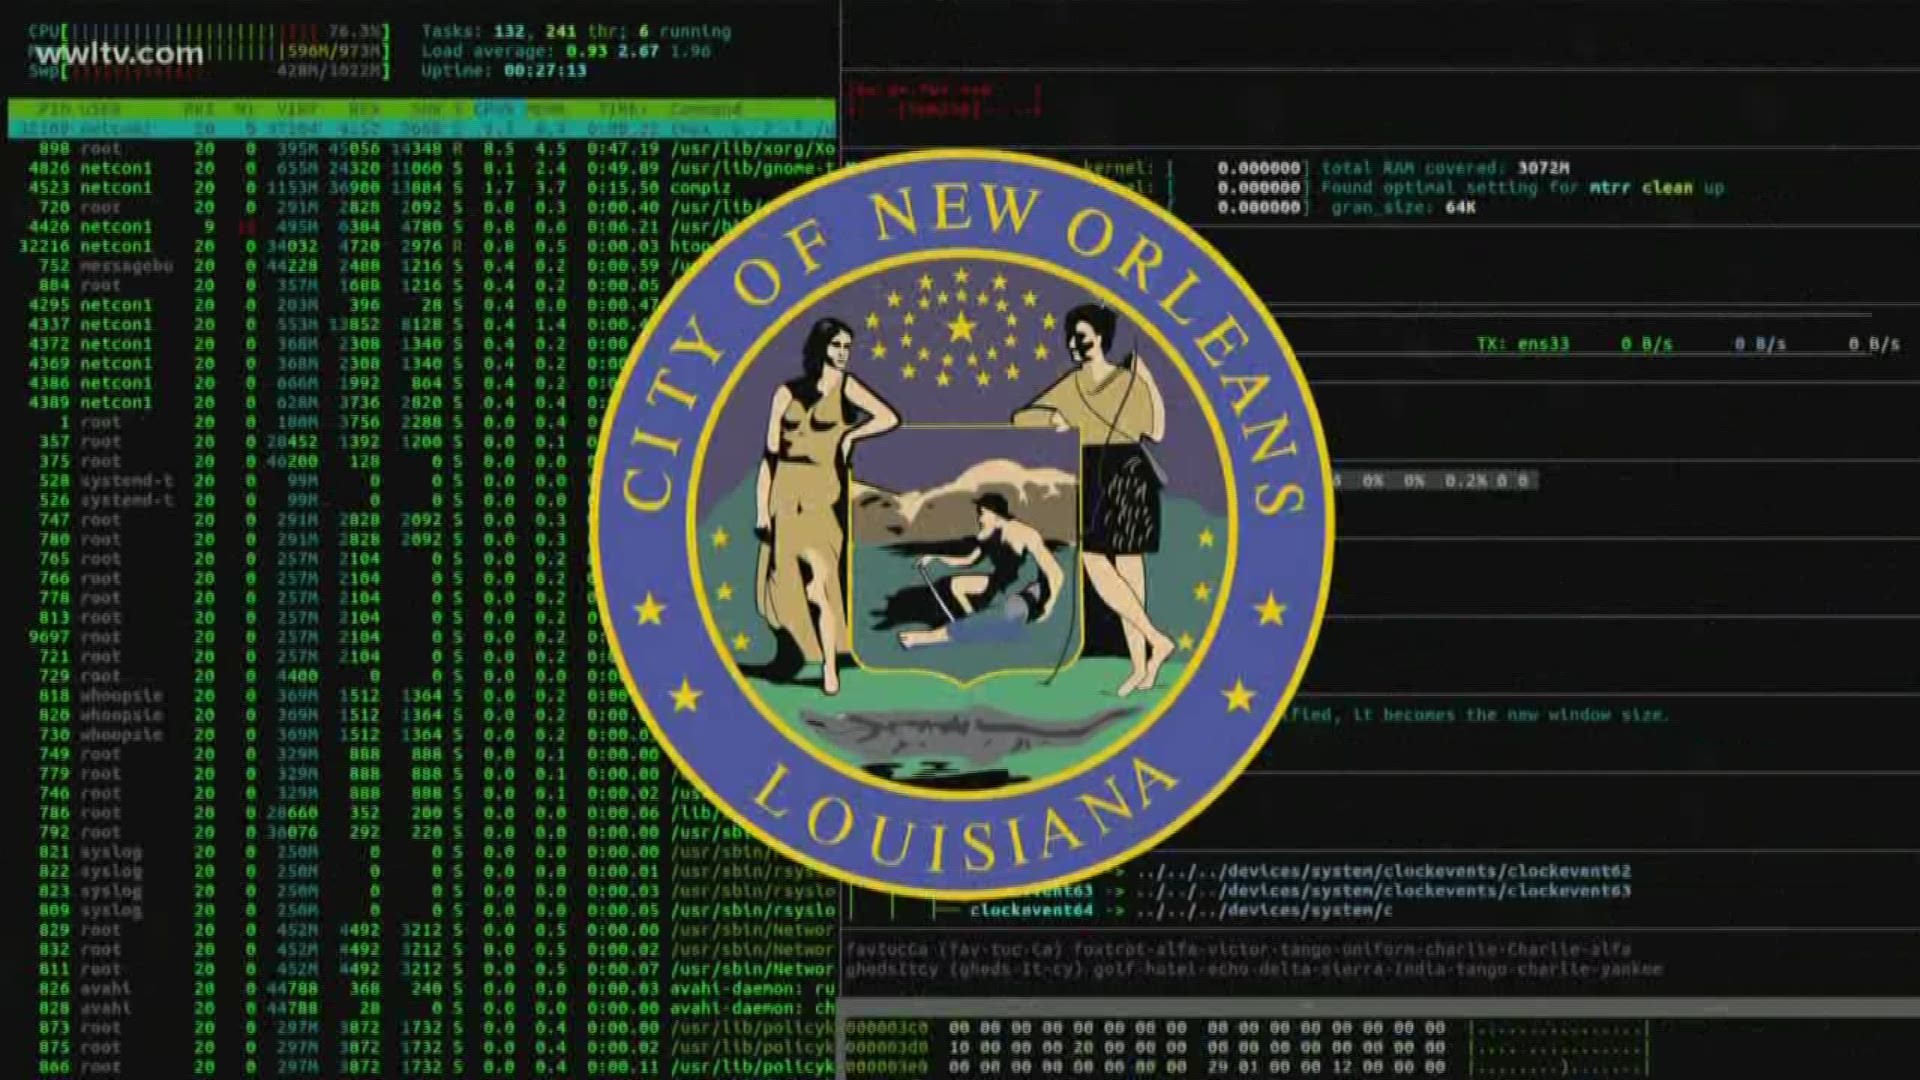 Computer systems owned by New Orleans city government were shut down Friday afternoon after engineers detected unwanted cyber activity.